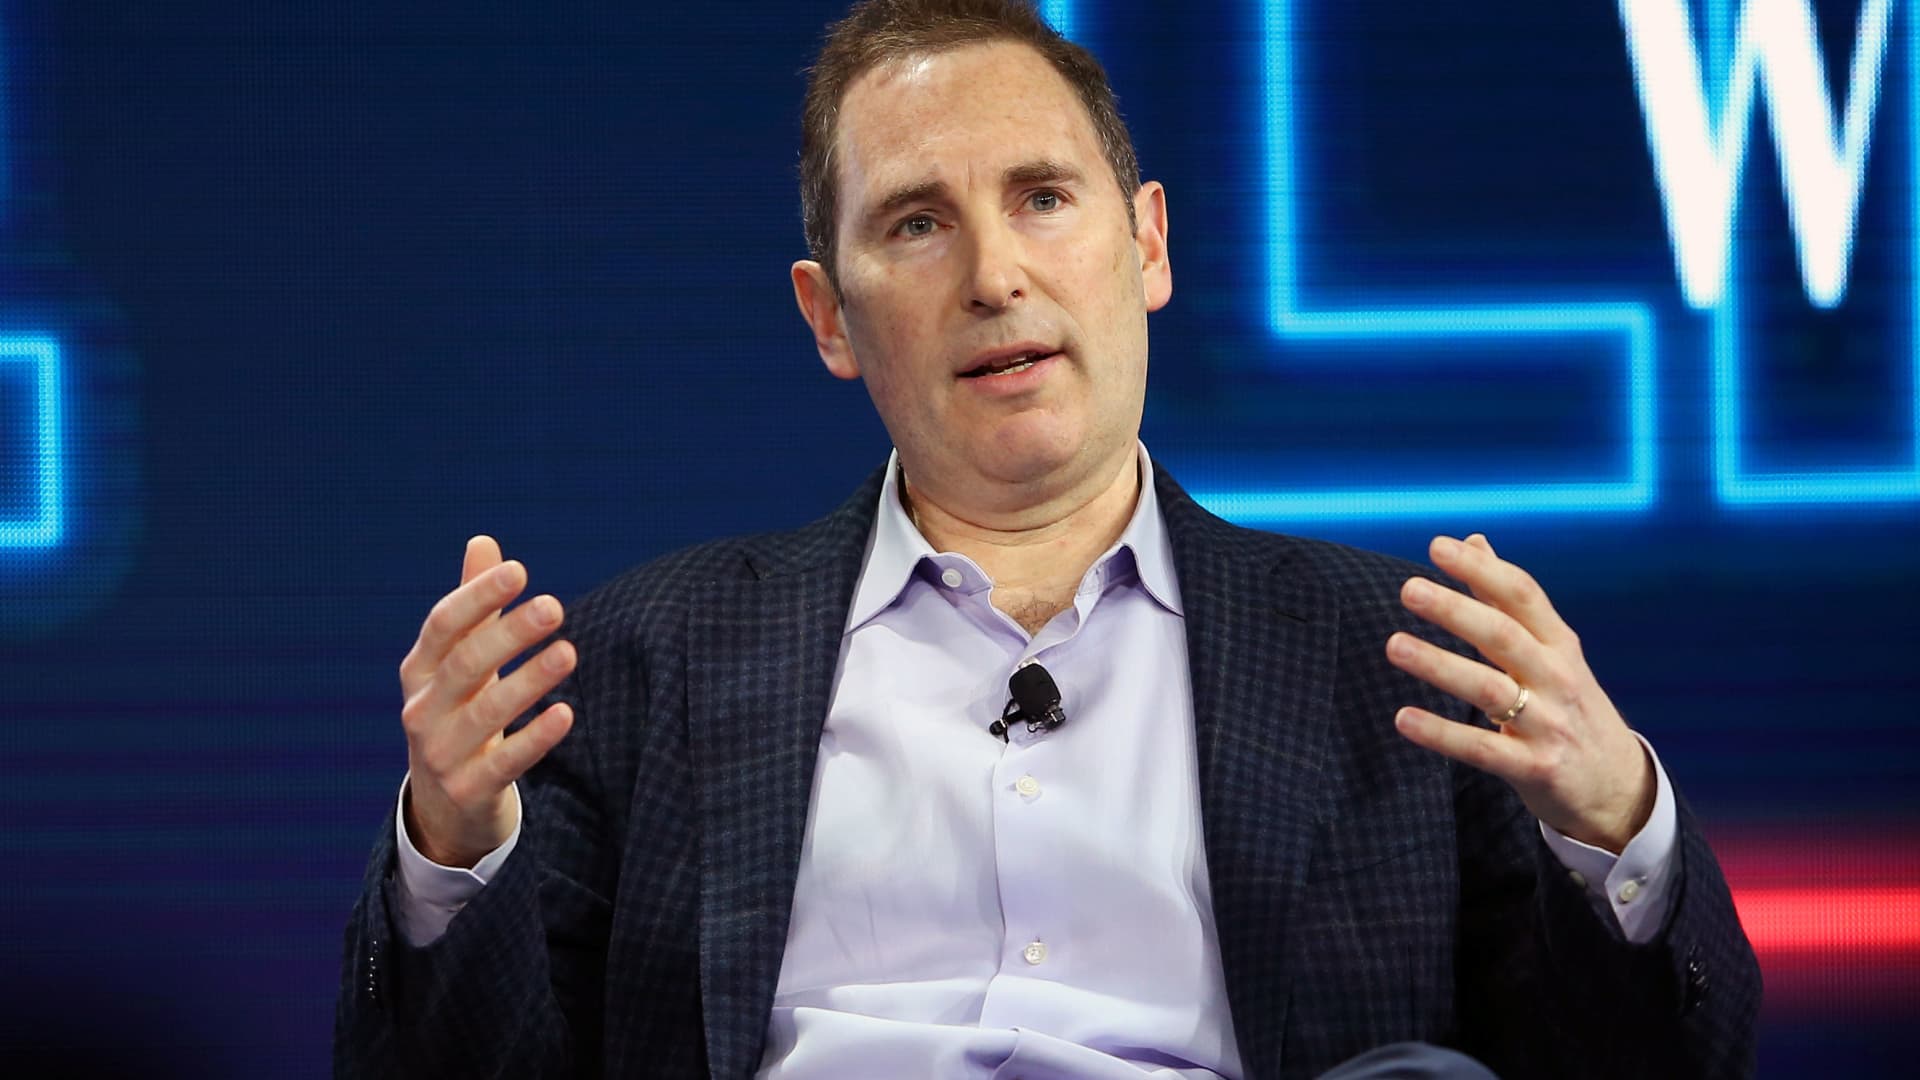 Amazon CEO Andy Jassy says he doesn't focus on company's stock price